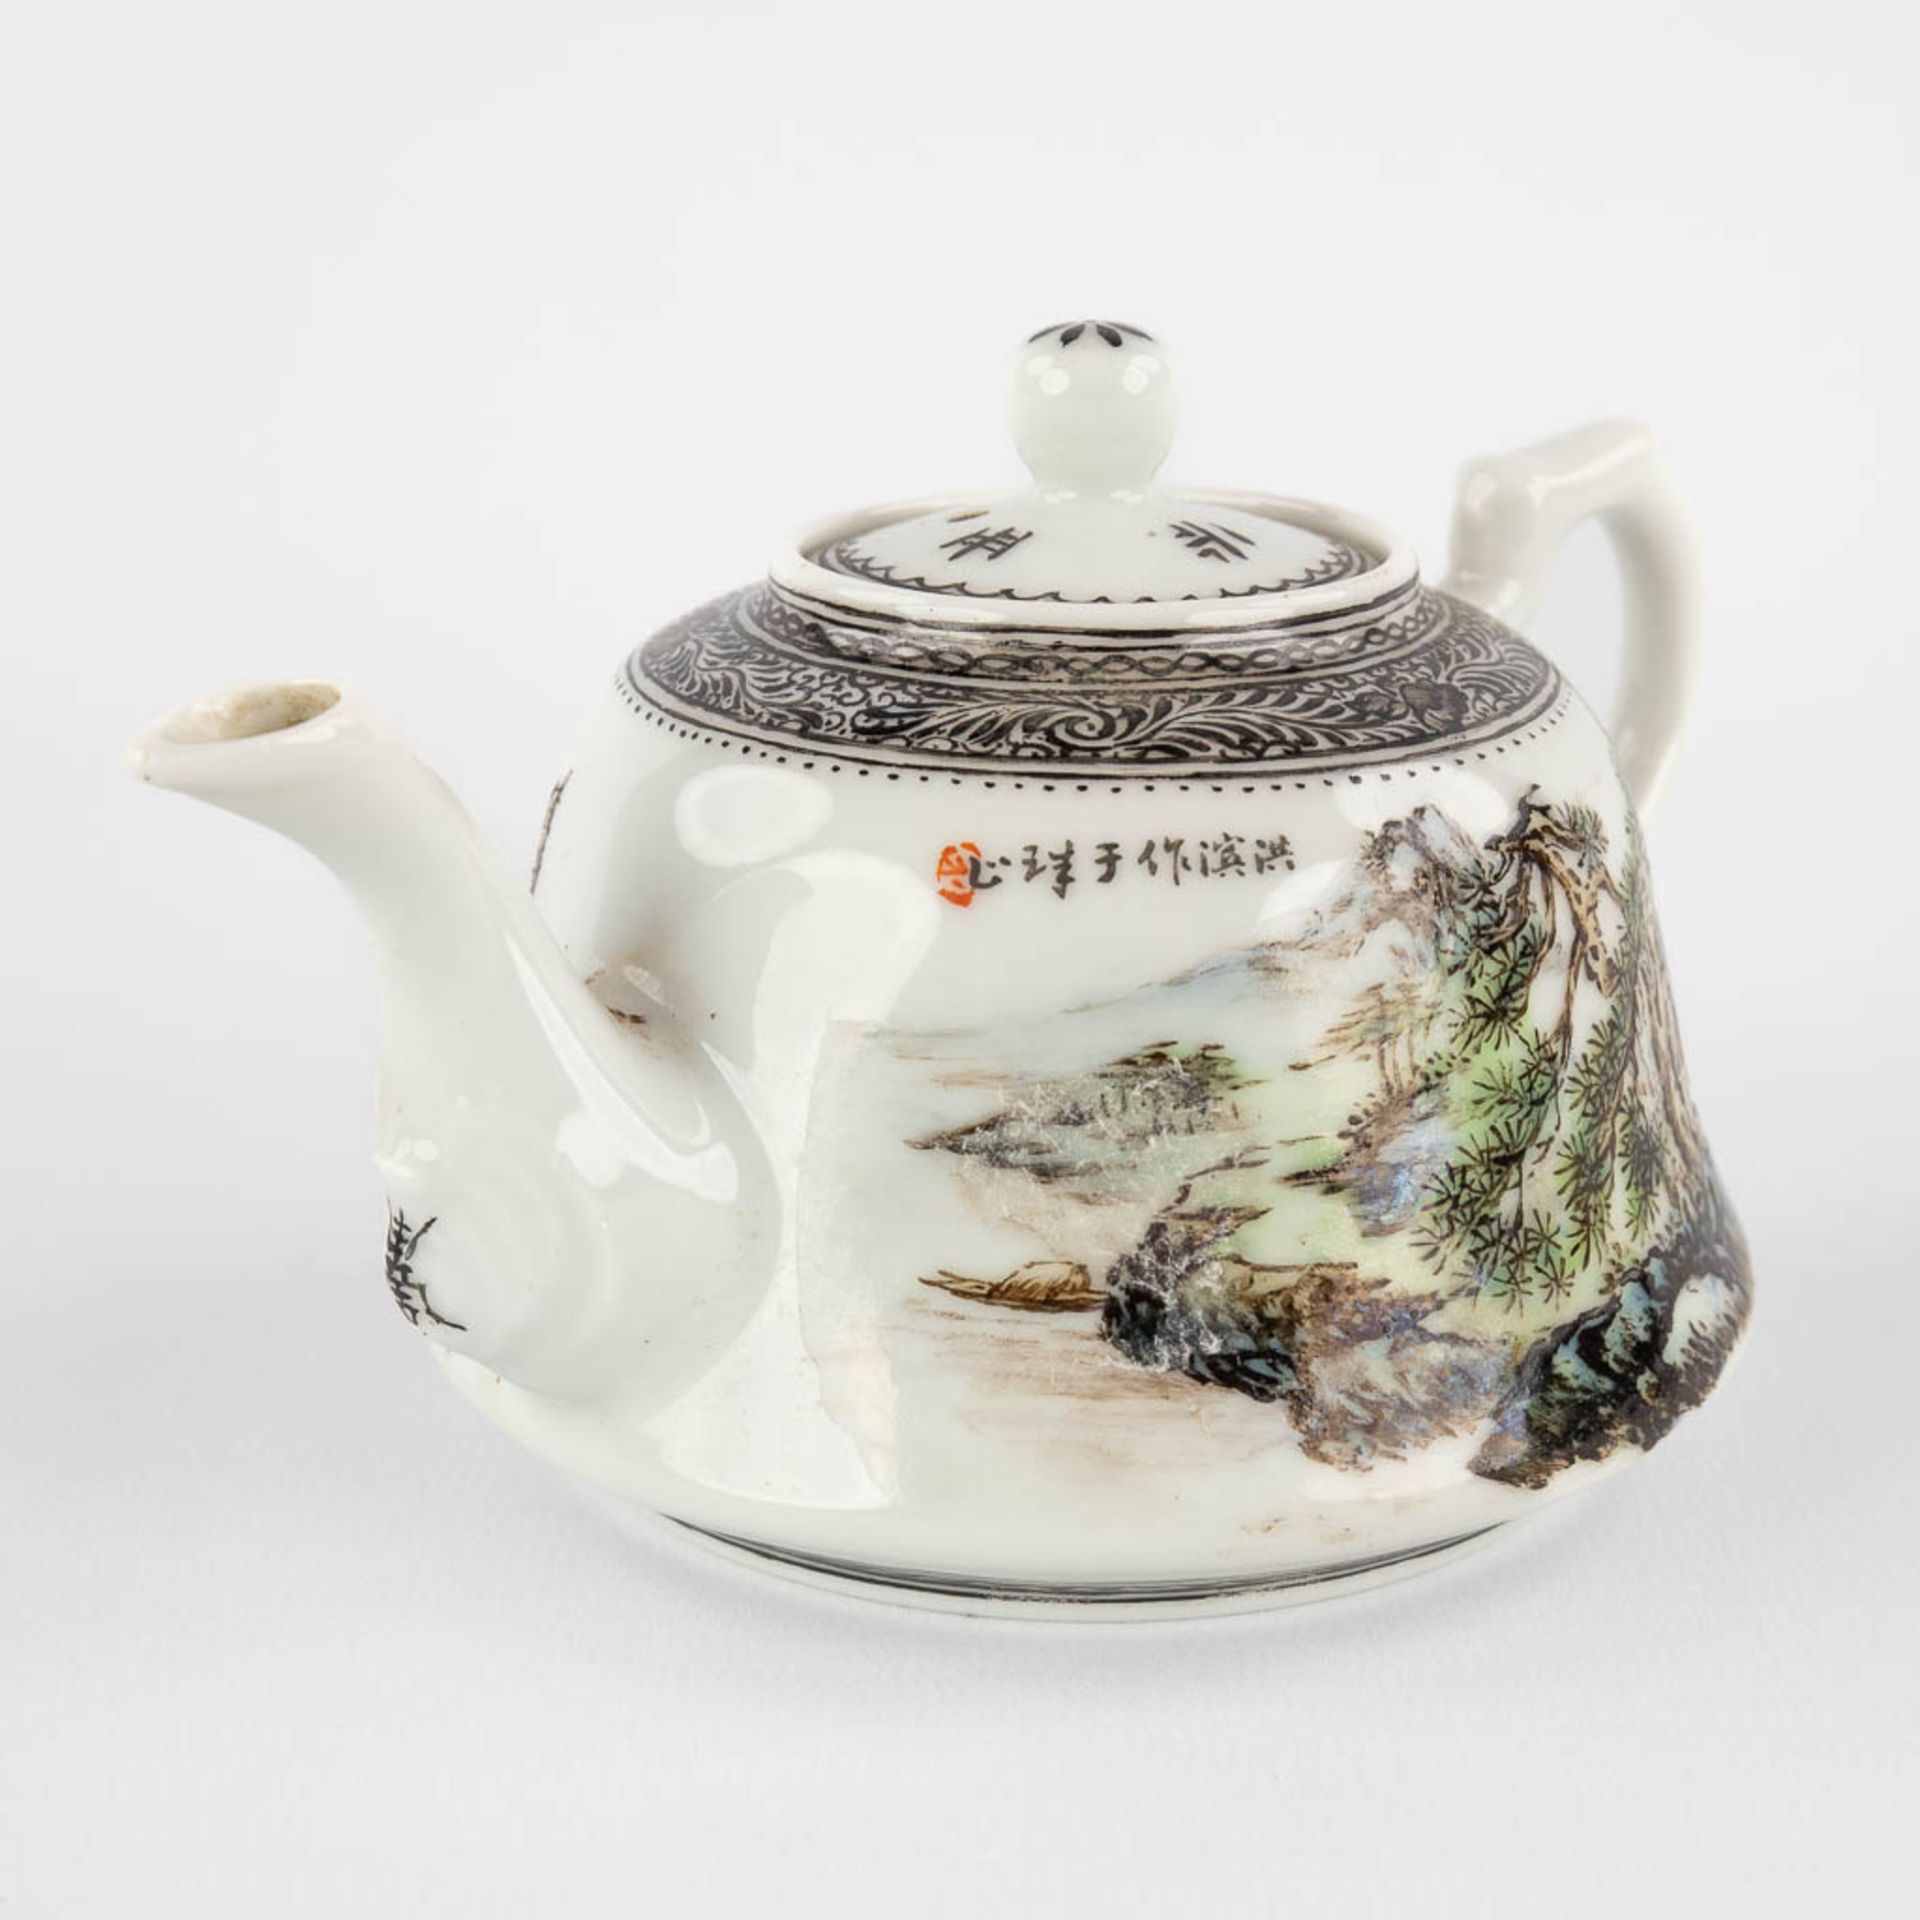 A Chinese teapot with landscape decor, 20th C. (D:11 x W:15 x H:9 cm) - Image 3 of 14